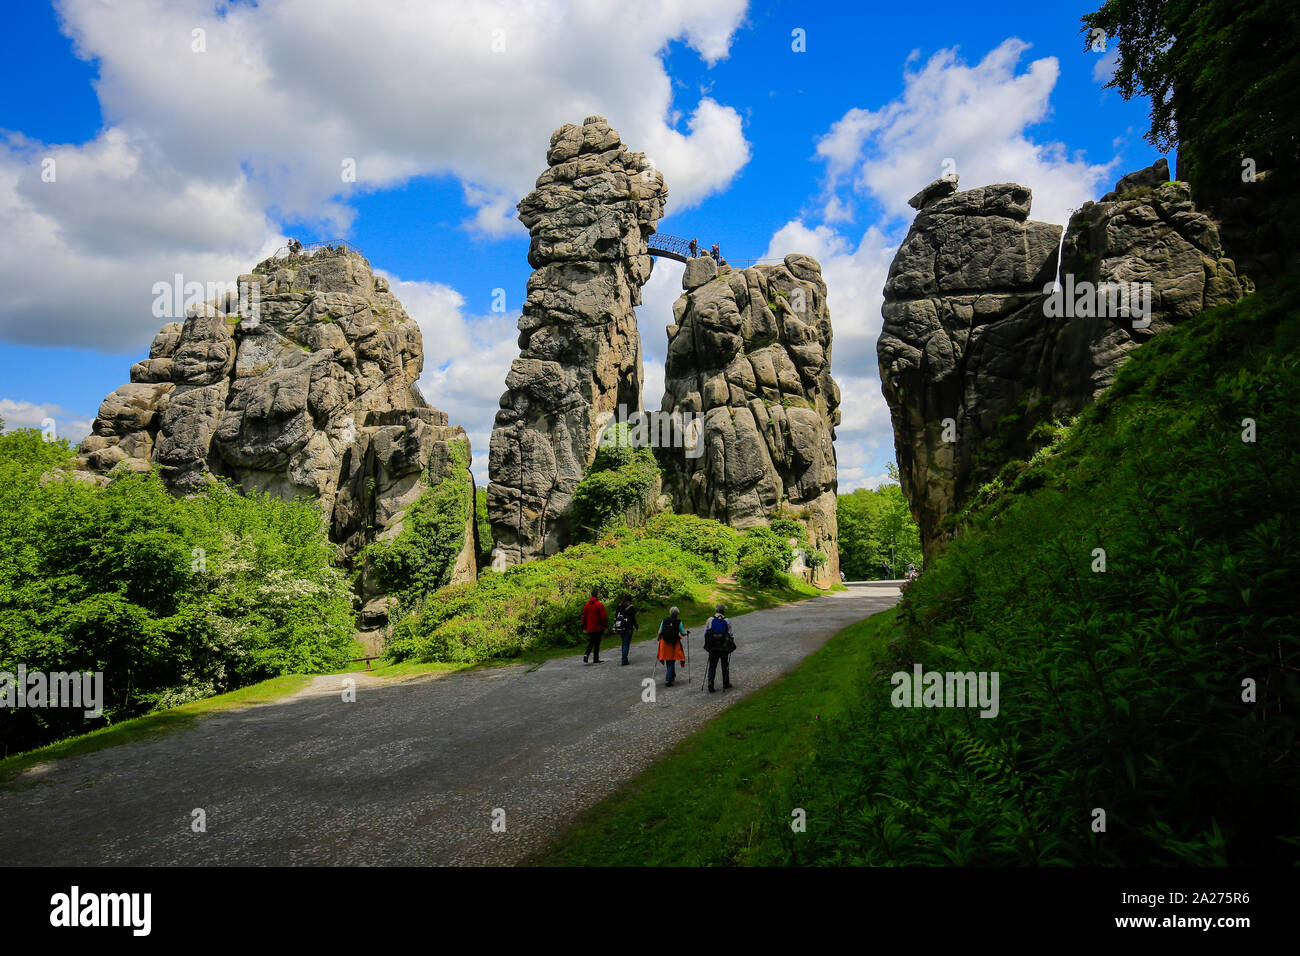 29.05.2019, Horn-Bad Meinberg, North Rhine-Westphalia, Germany - Externsteine, a striking sandstone rock formation in the Teutoburg Forest and, as suc Stock Photo